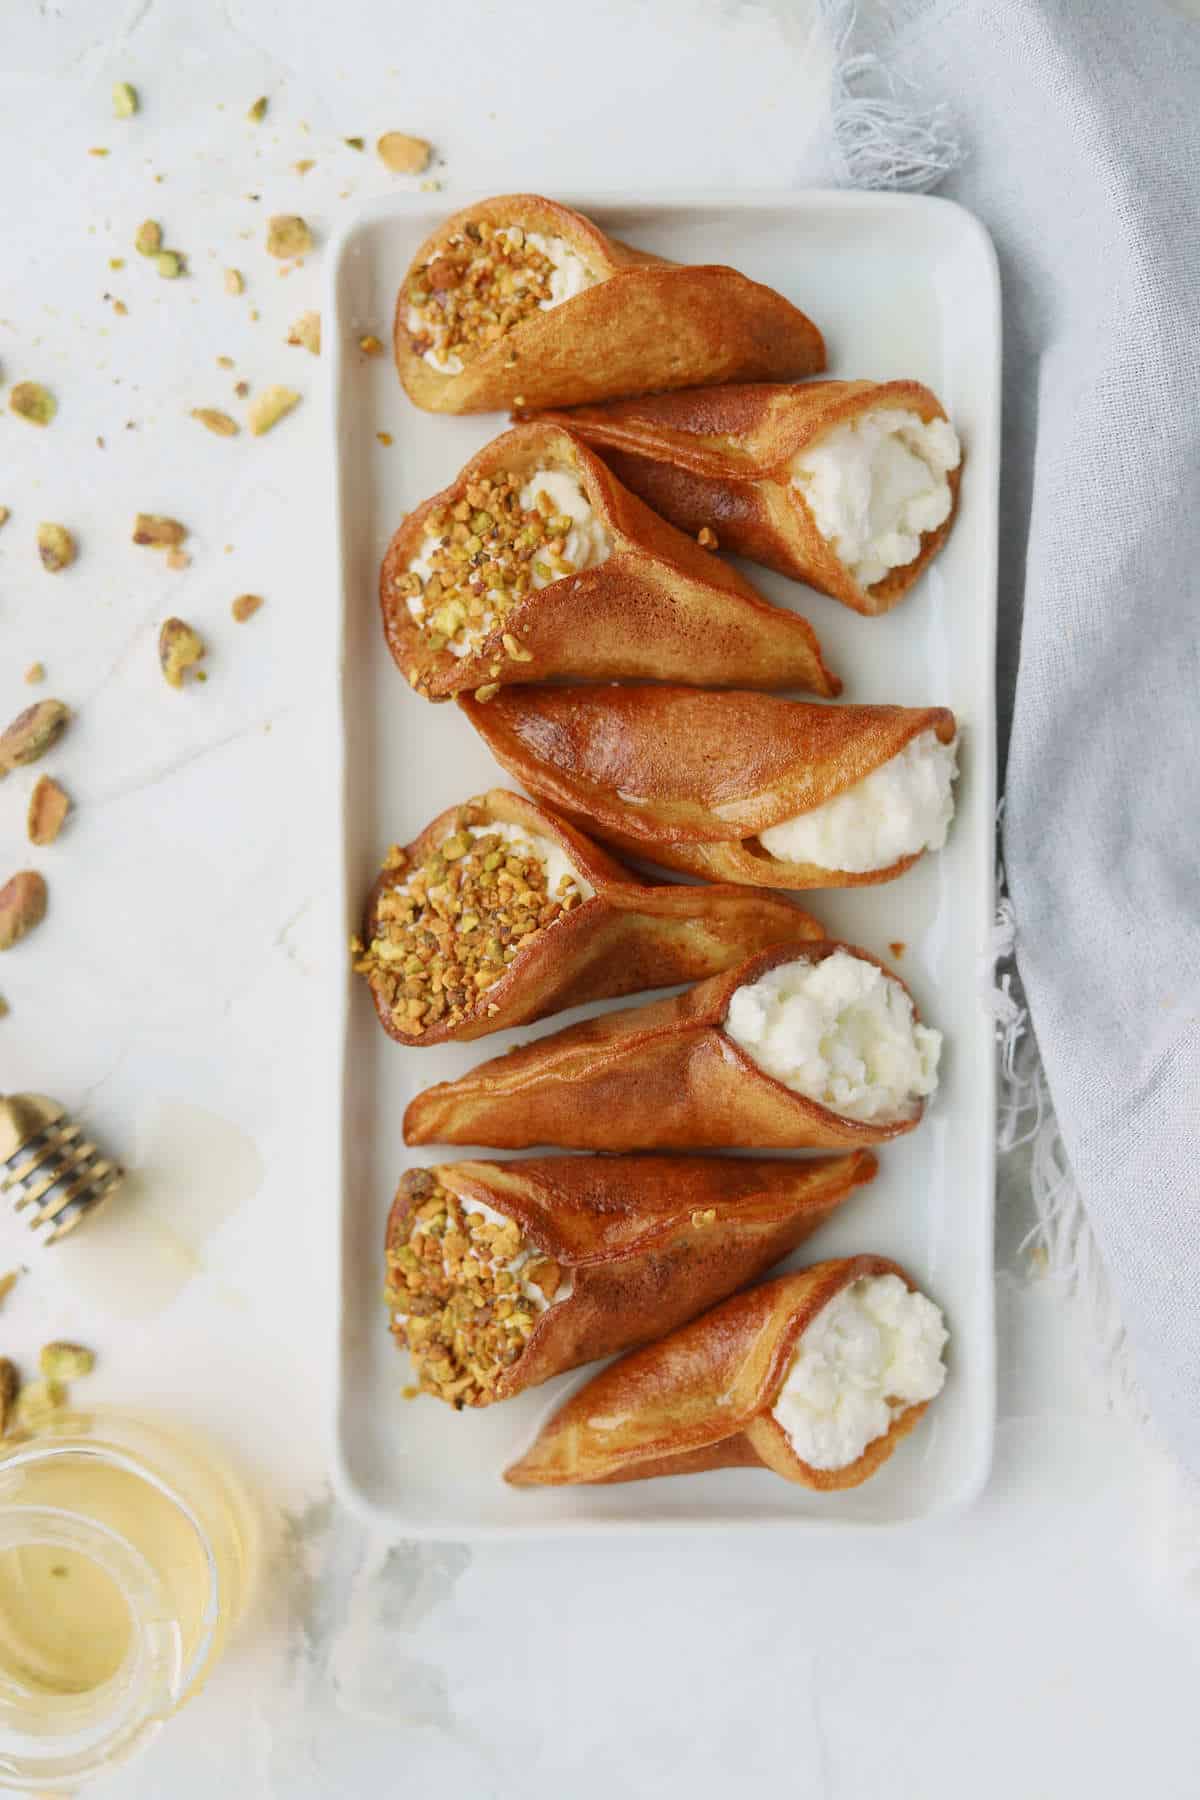 Atayef with Whipped Cream and Pistachios